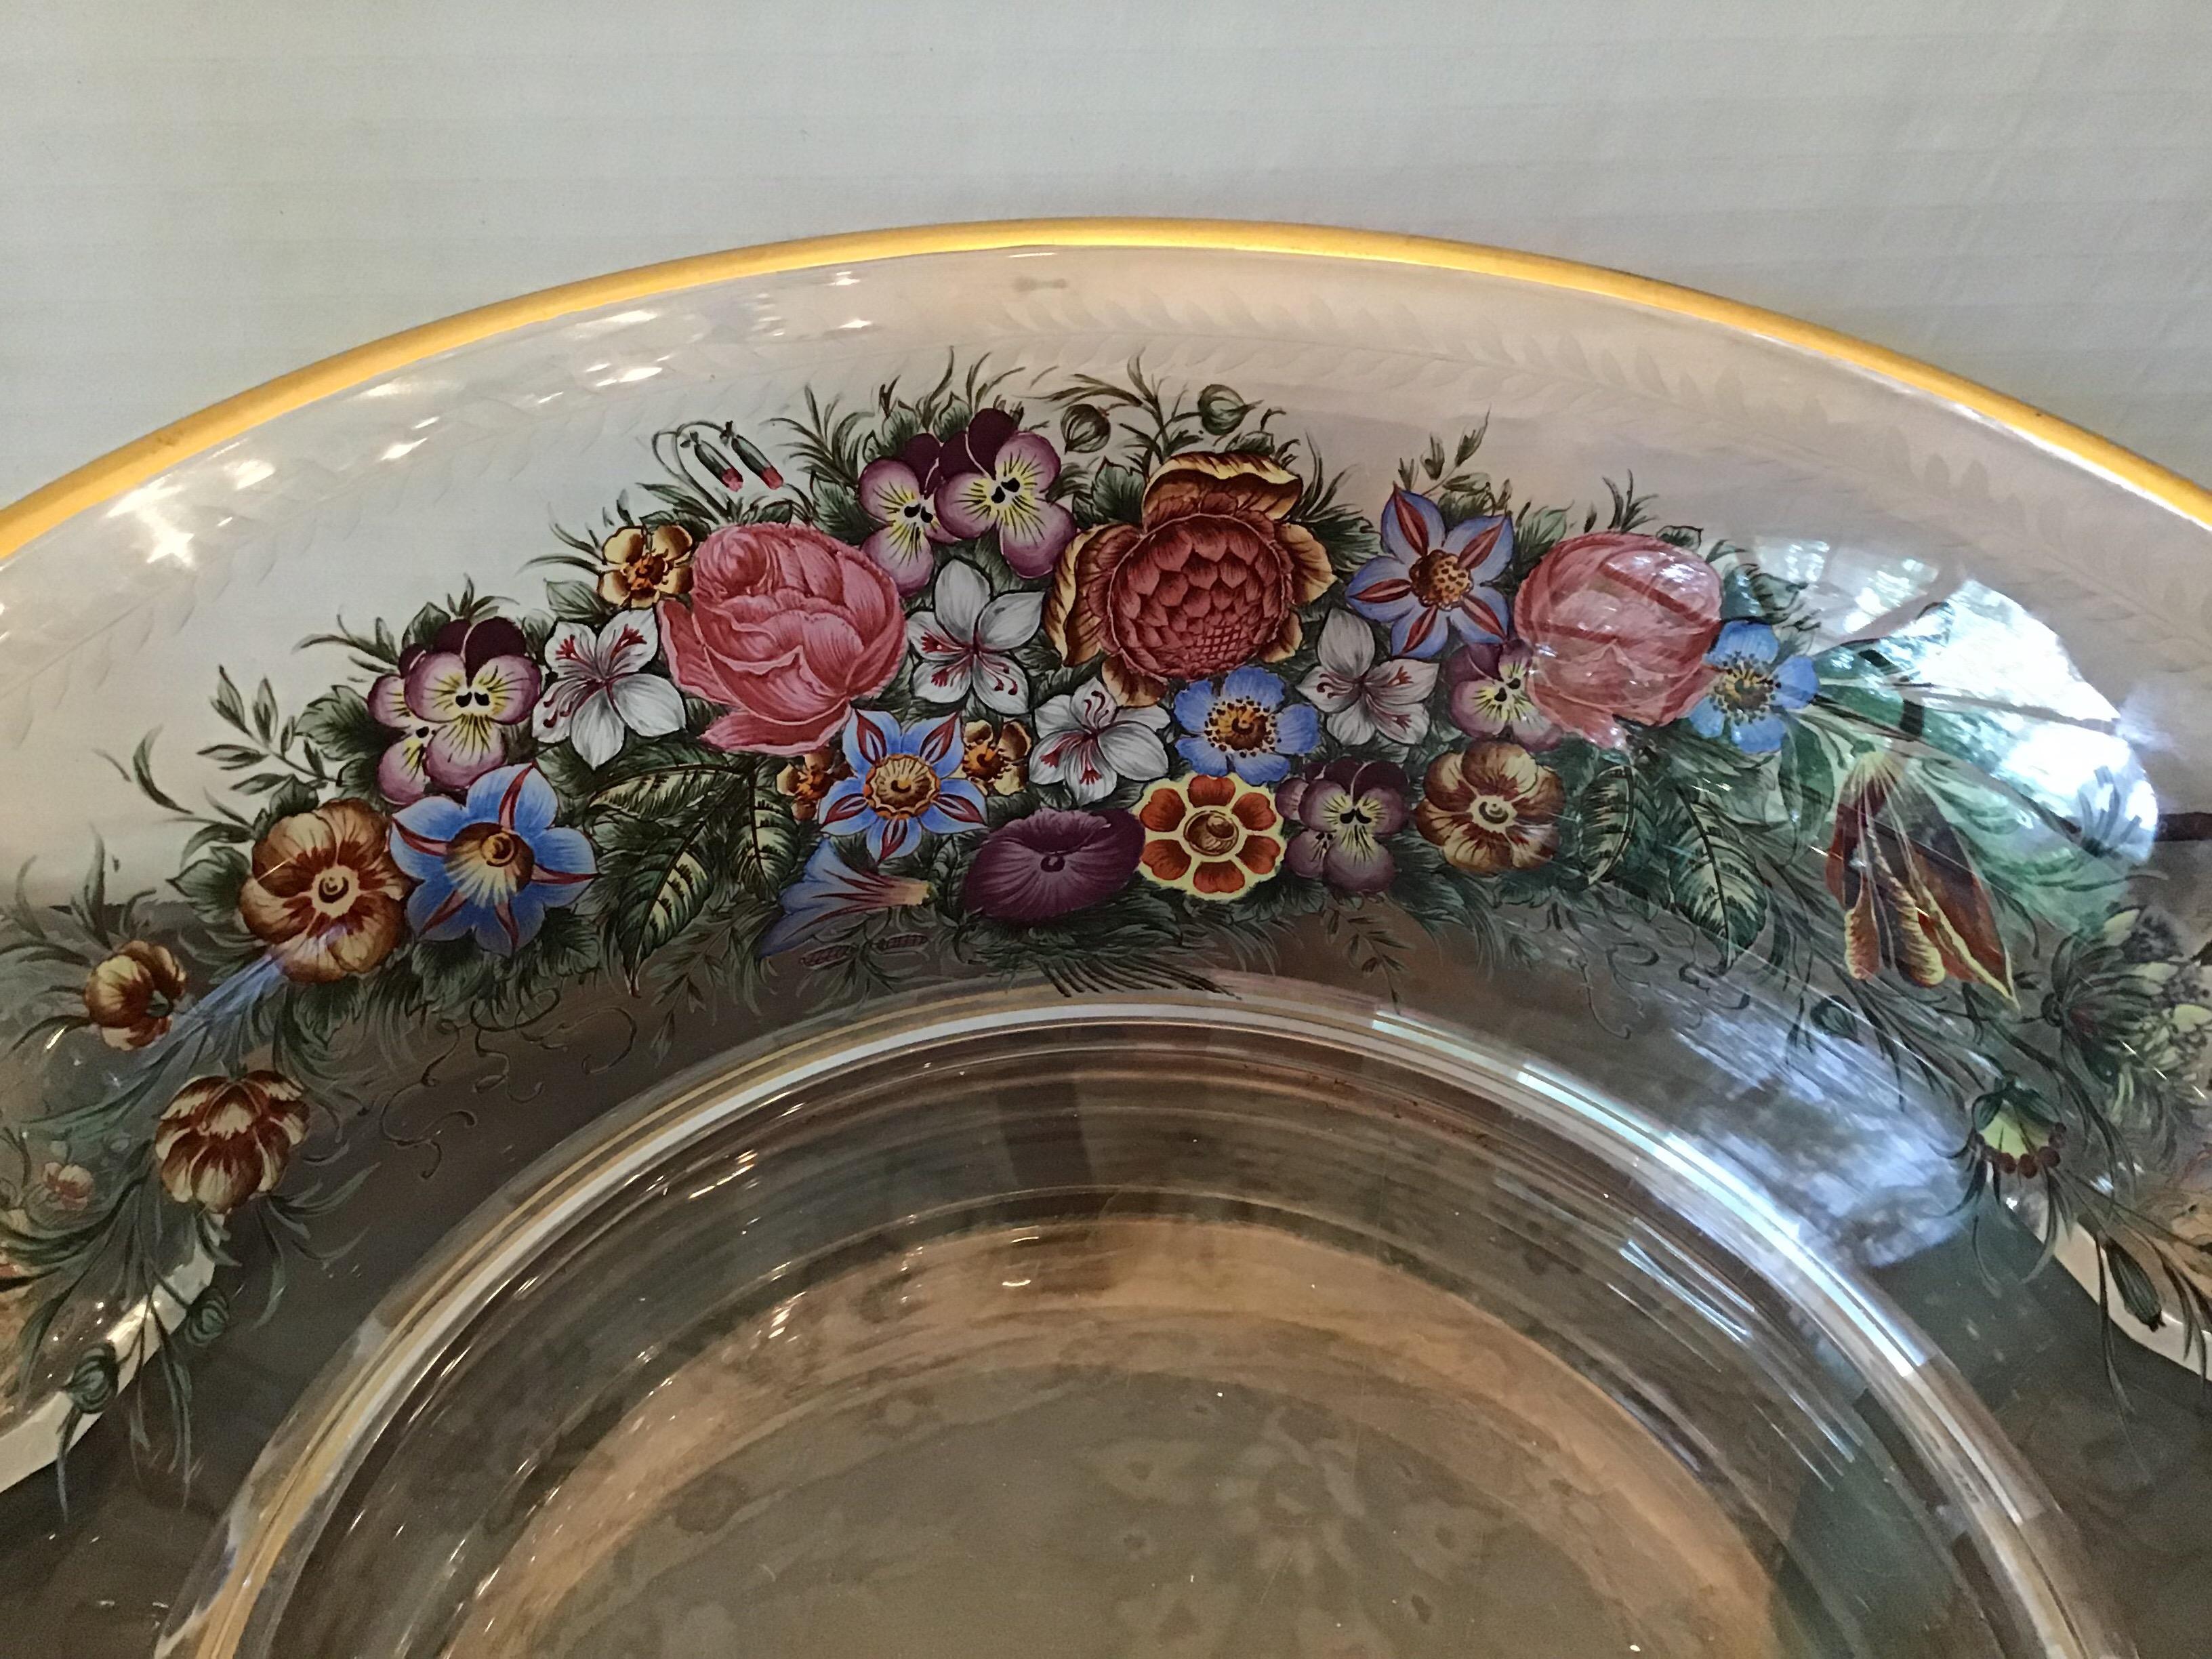 This is the most beautiful 19th century hand painted enameled floral glassware set. I am attributing it to Lobmeyr or moser. The quality is exceptional and the painting is intricate detailed and very colorful. The set includes 34 pieces. Each piece